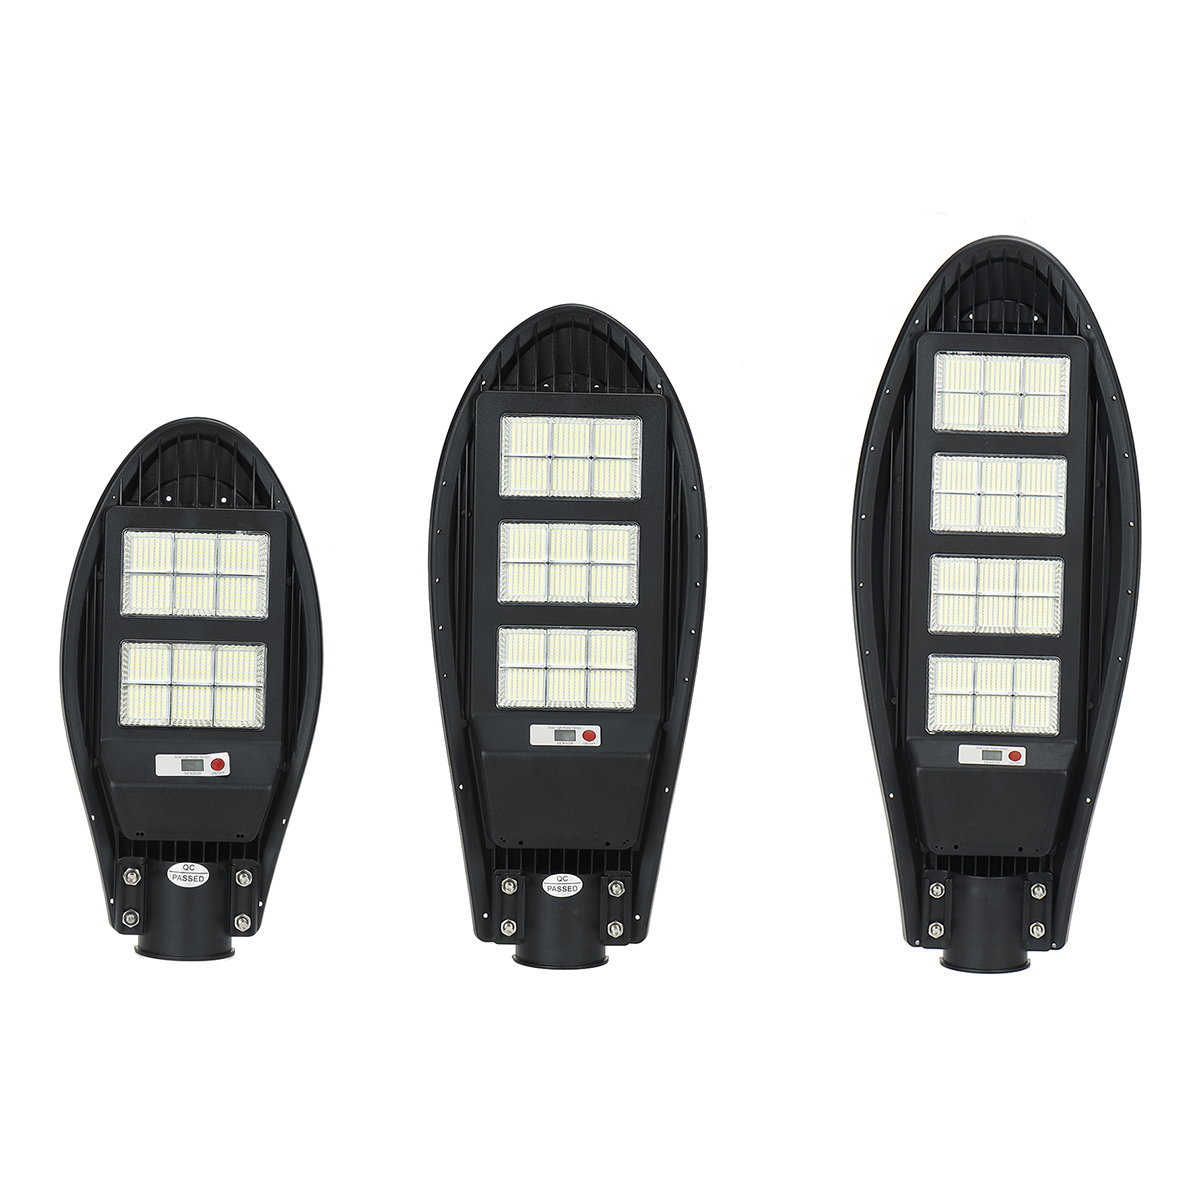 Find 756/1138/1512LED Solar Street Light Motion Sensor Outdoor Garden Area Road Spotlight IP65 for Sale on Gipsybee.com with cryptocurrencies